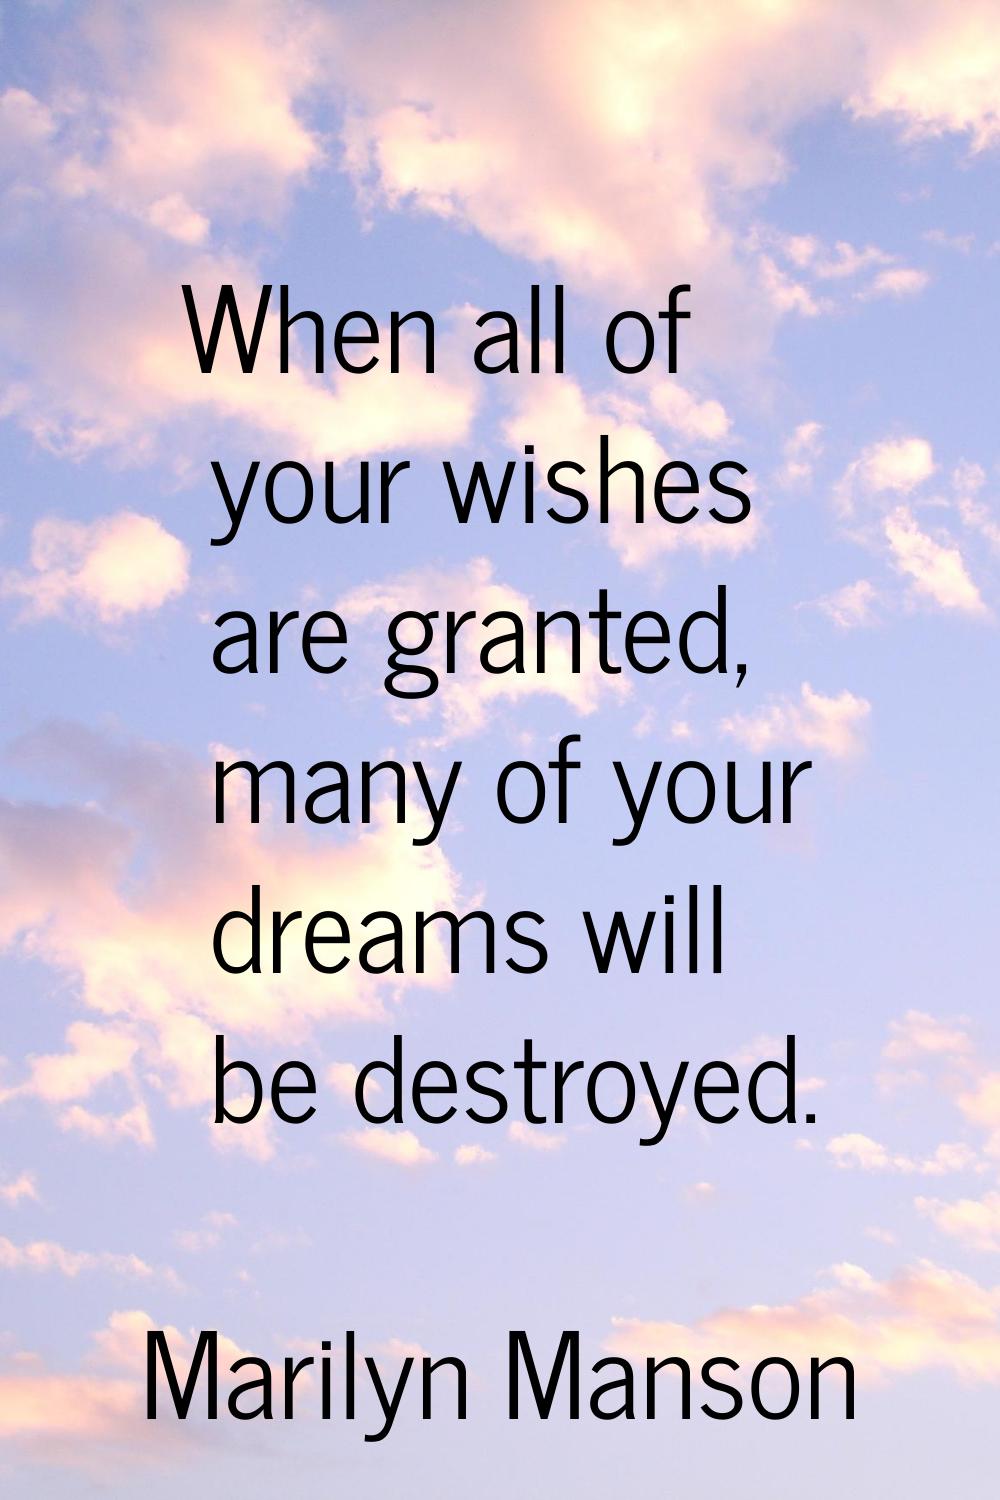 When all of your wishes are granted, many of your dreams will be destroyed.